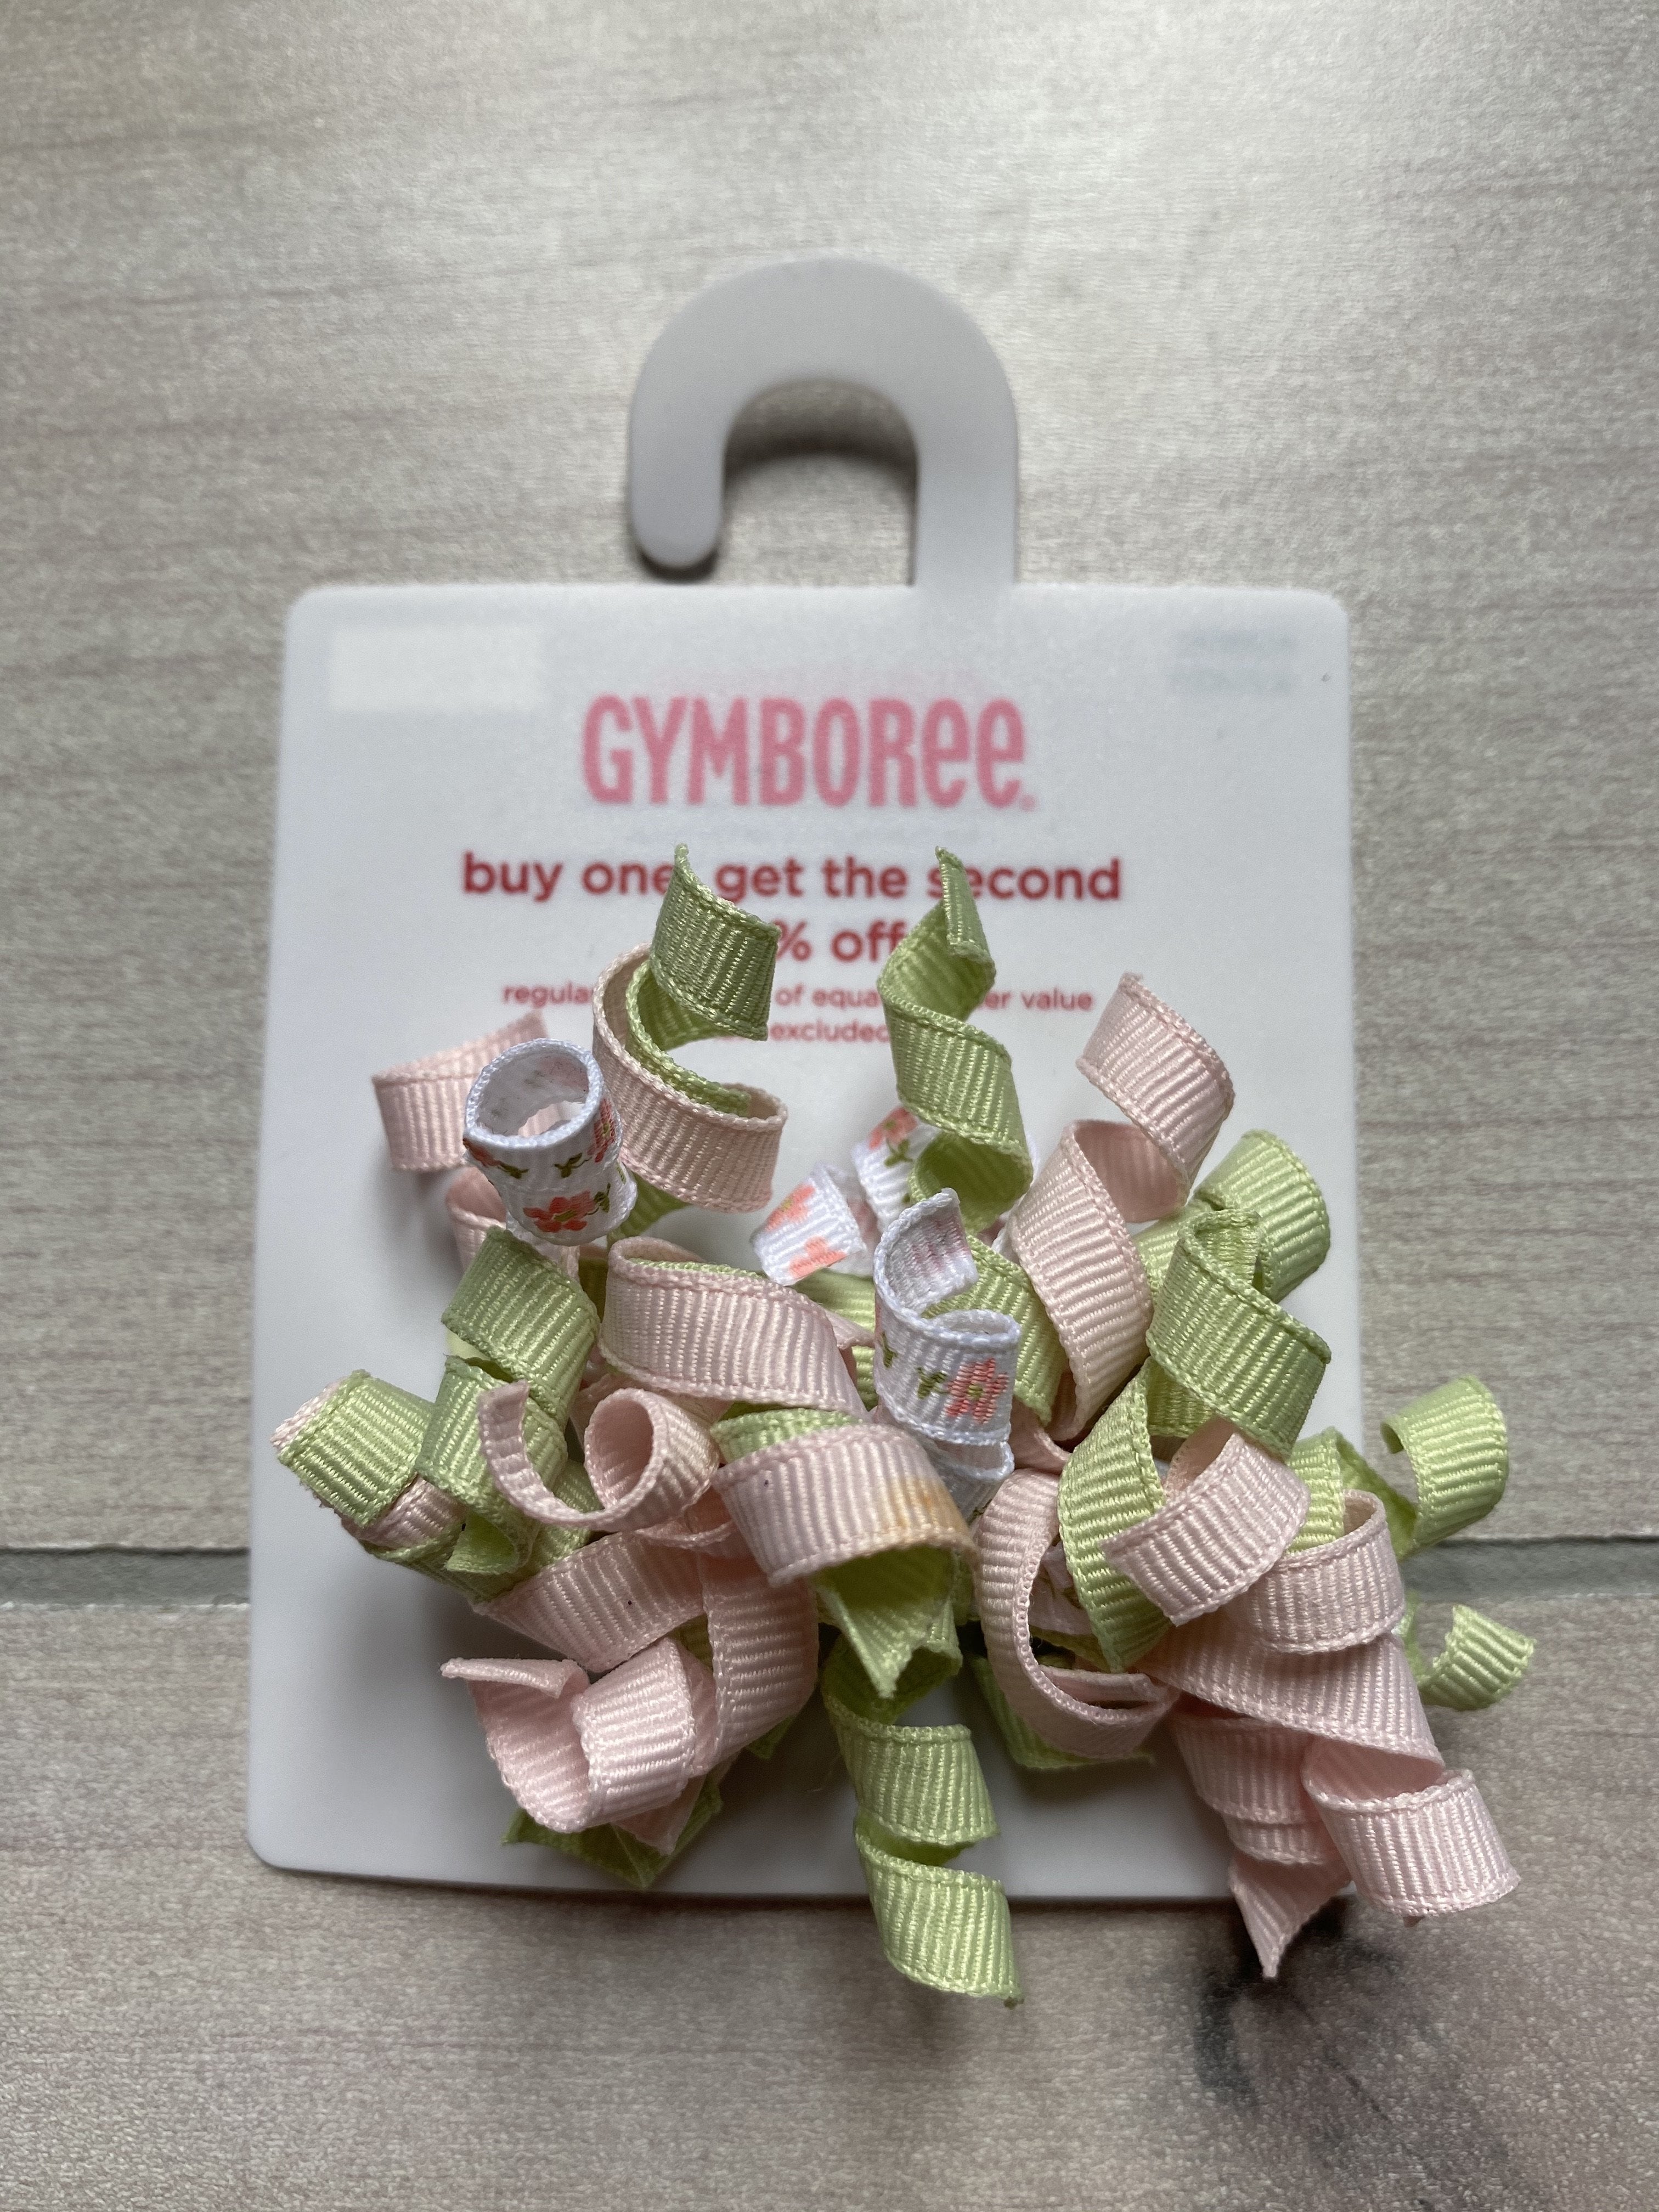 NEW Gymboree Pink & Green Floral Curly Ribbon Plastic Barrette